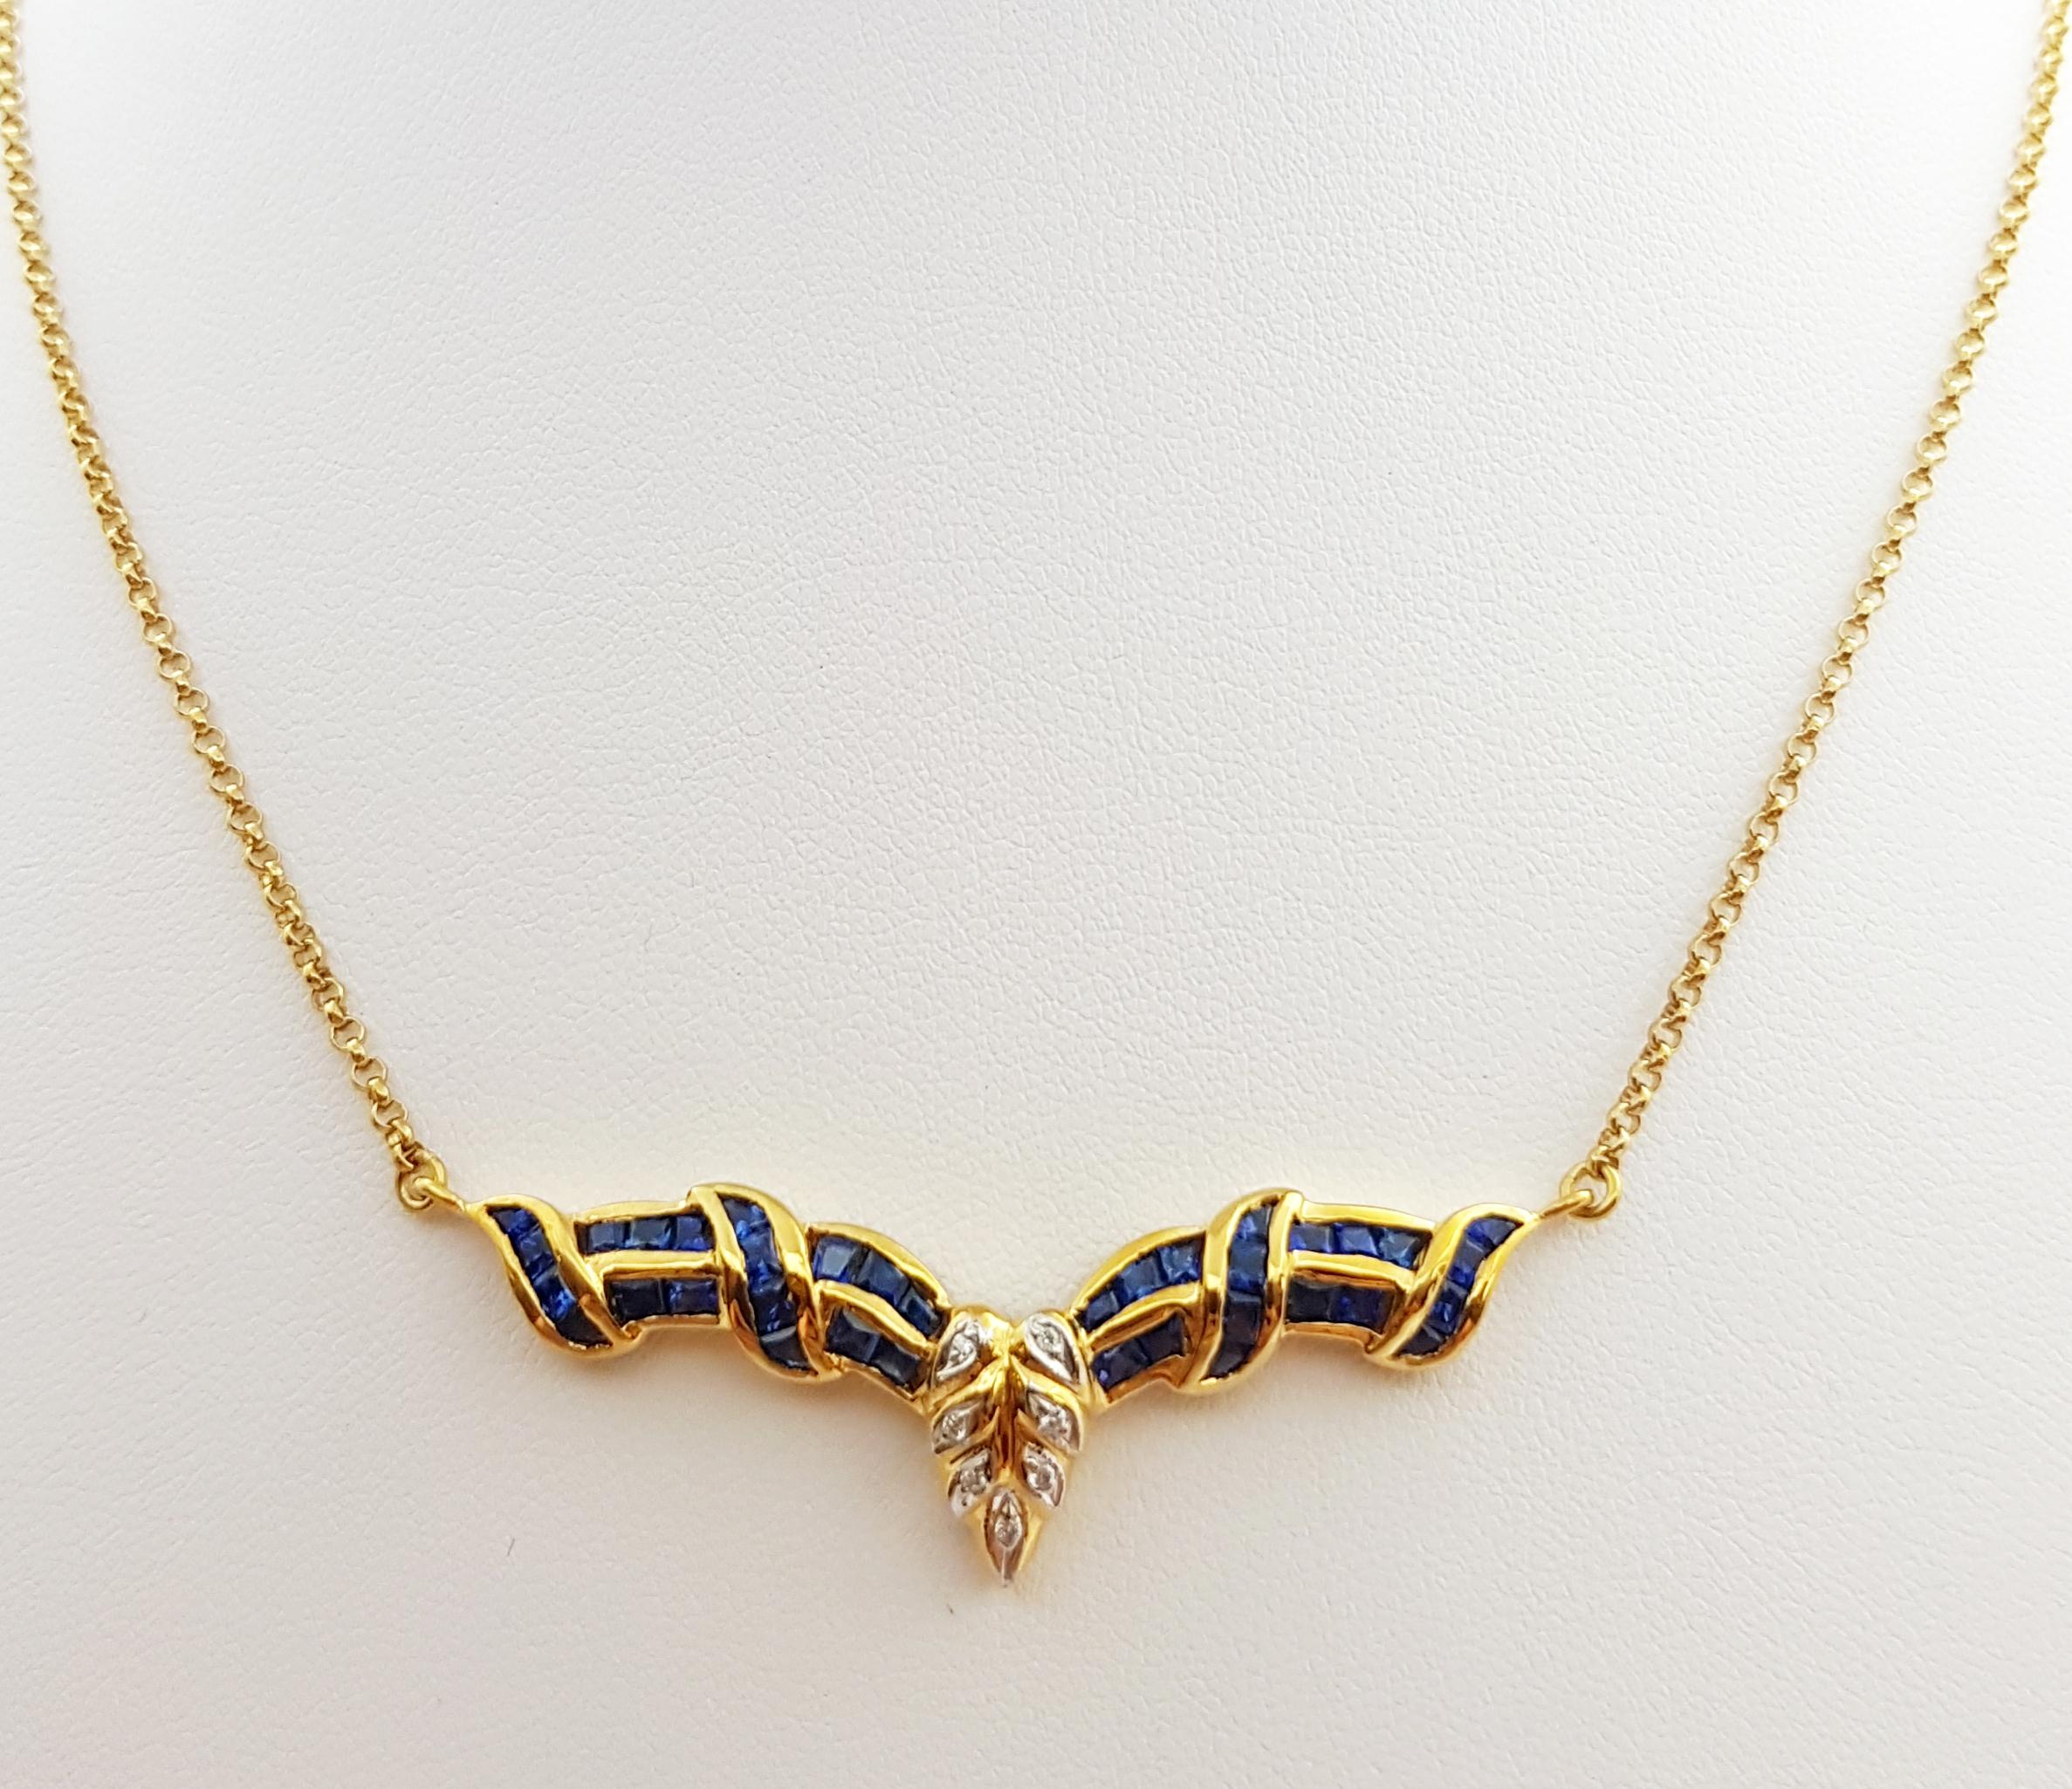 Blue Sapphire with Diamond Necklace Set in 18 Karat Gold Settings For Sale 1